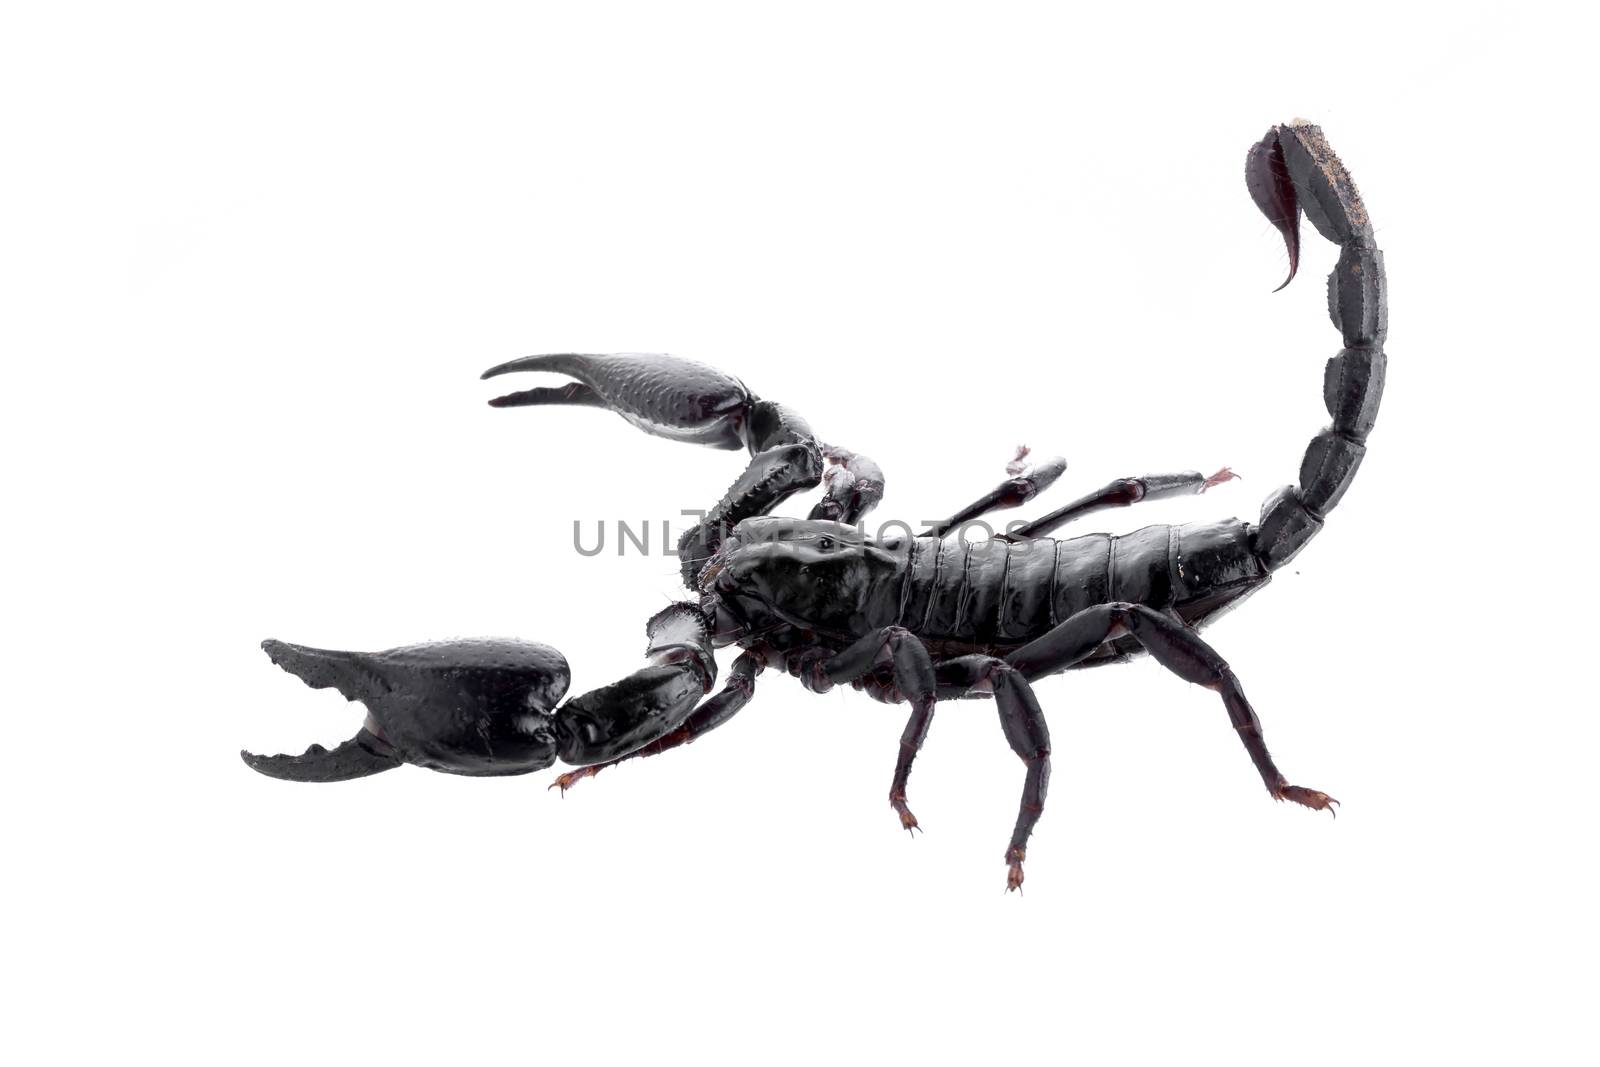 Black scorpions isolated on a white background.